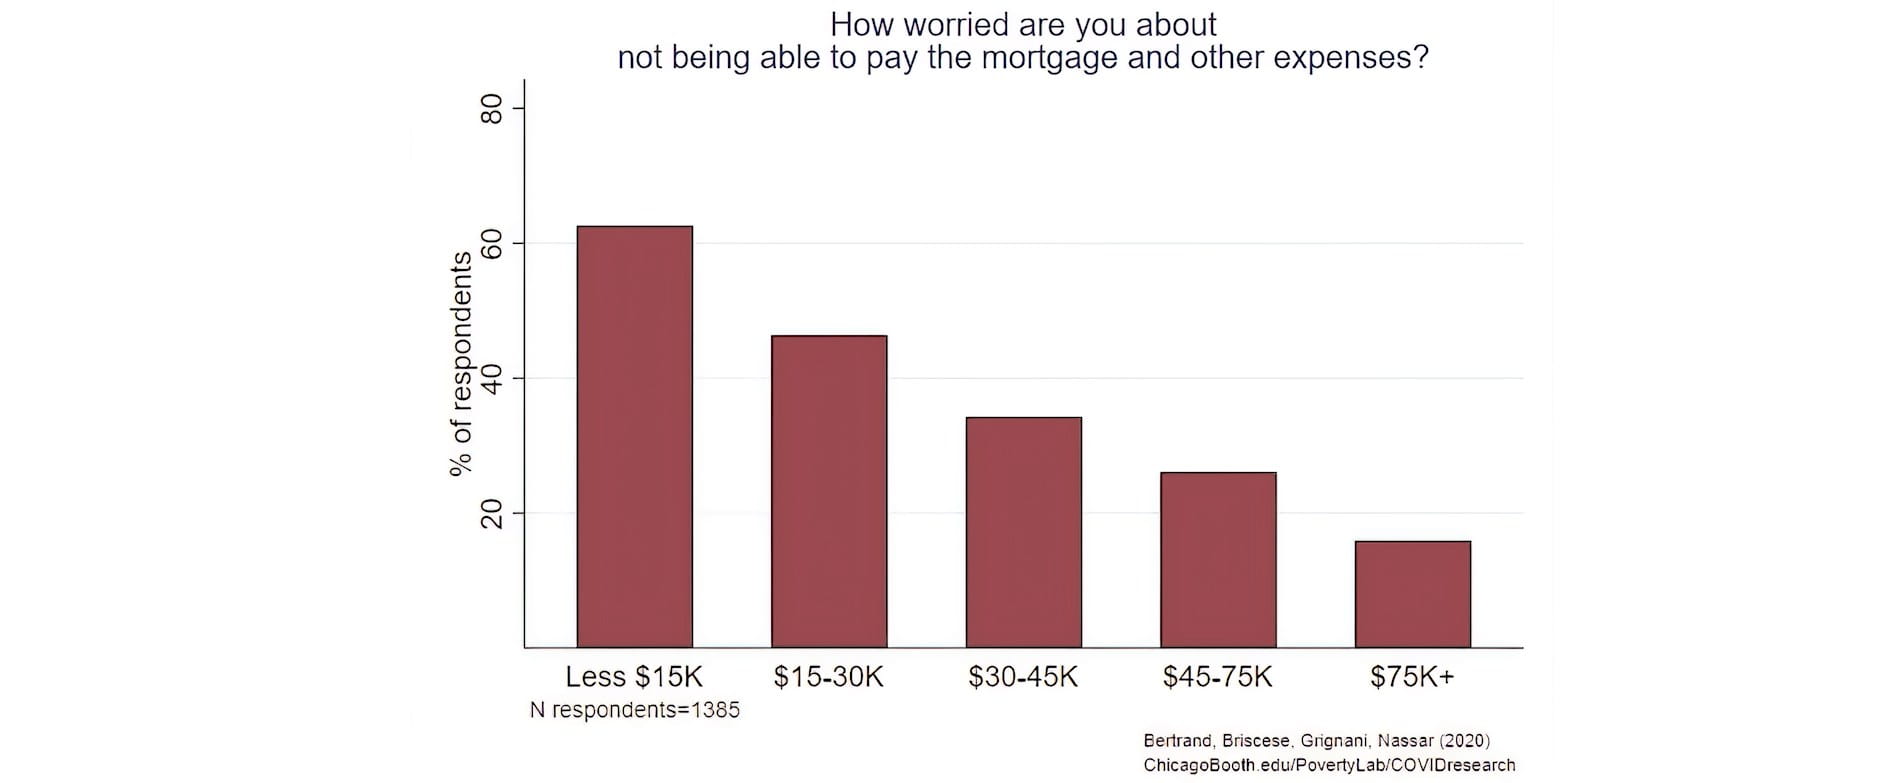 Finding 3c Vertical Bar Graph How worried are you about not being able to pay the morgage and other expenses